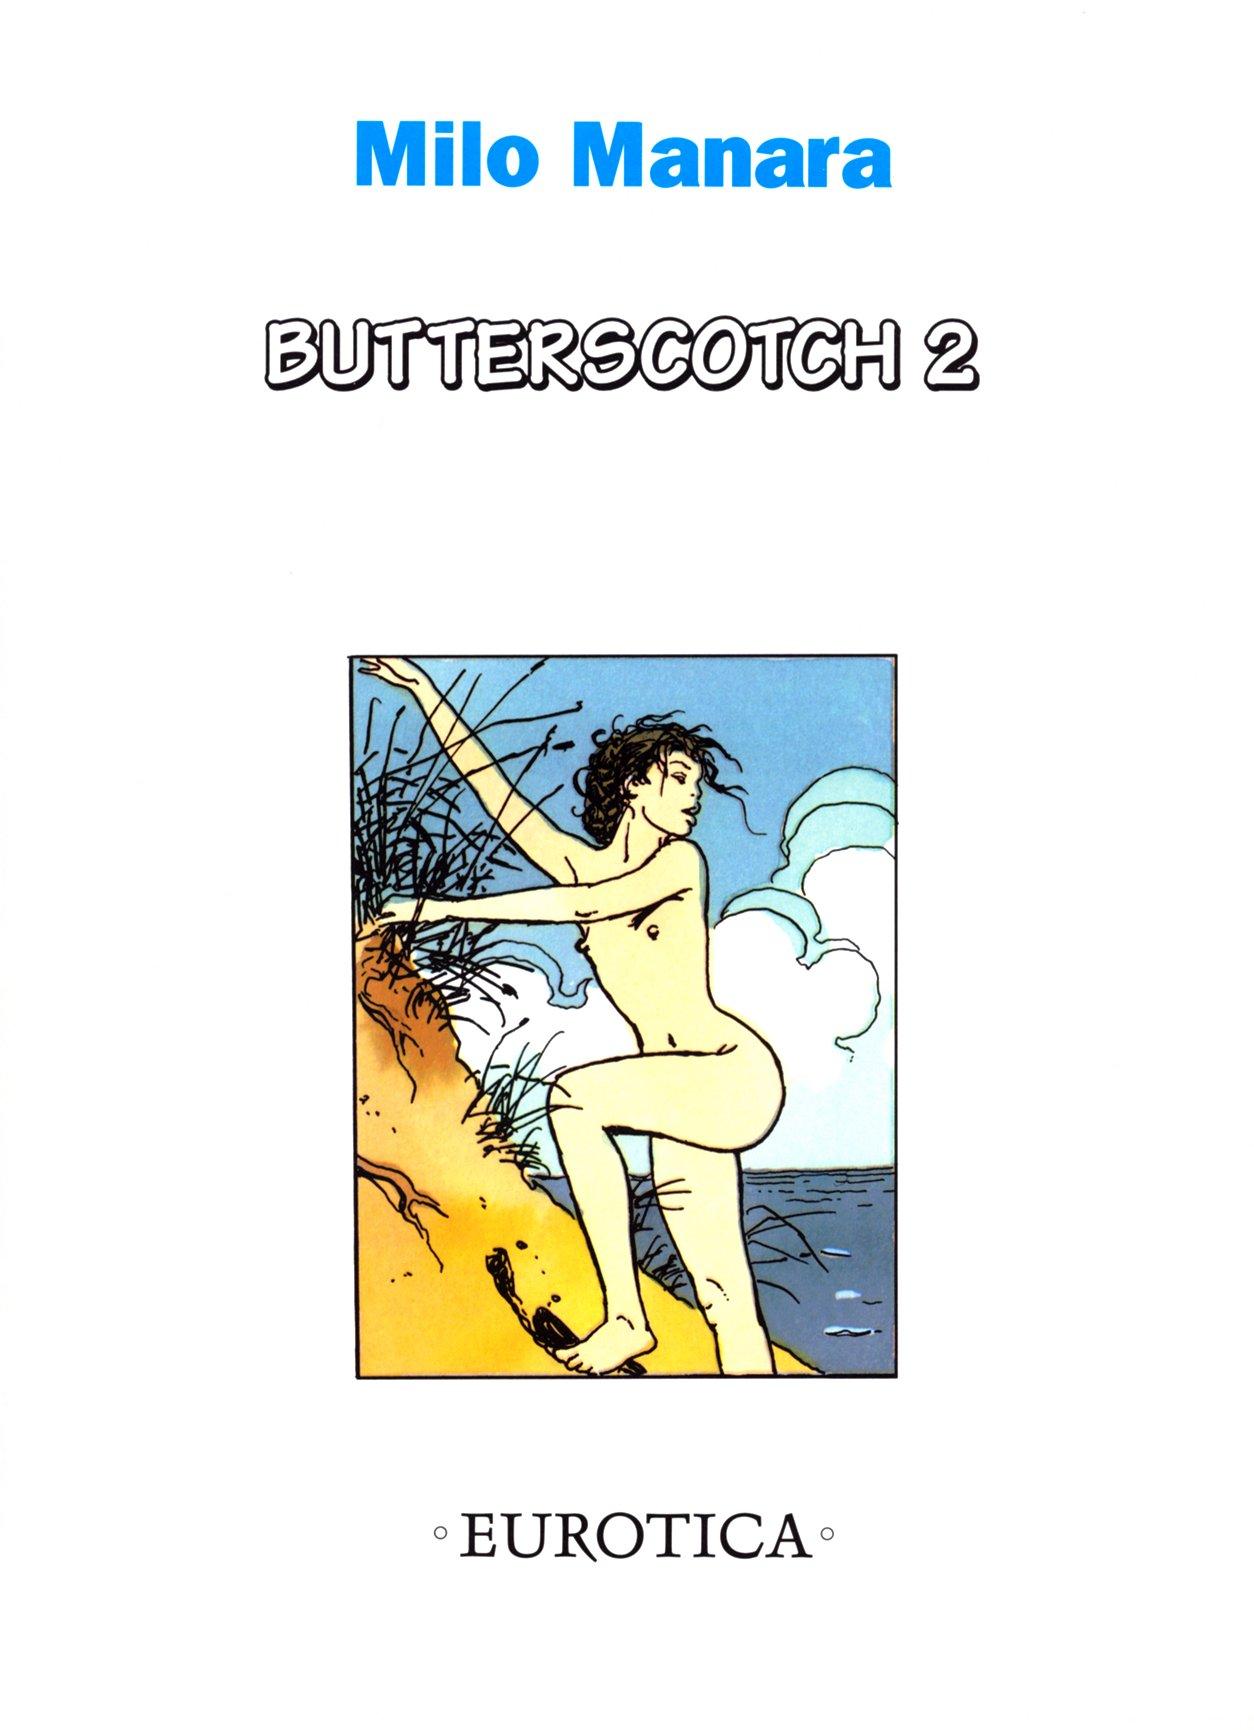 134290 main Butterscoth2 cover